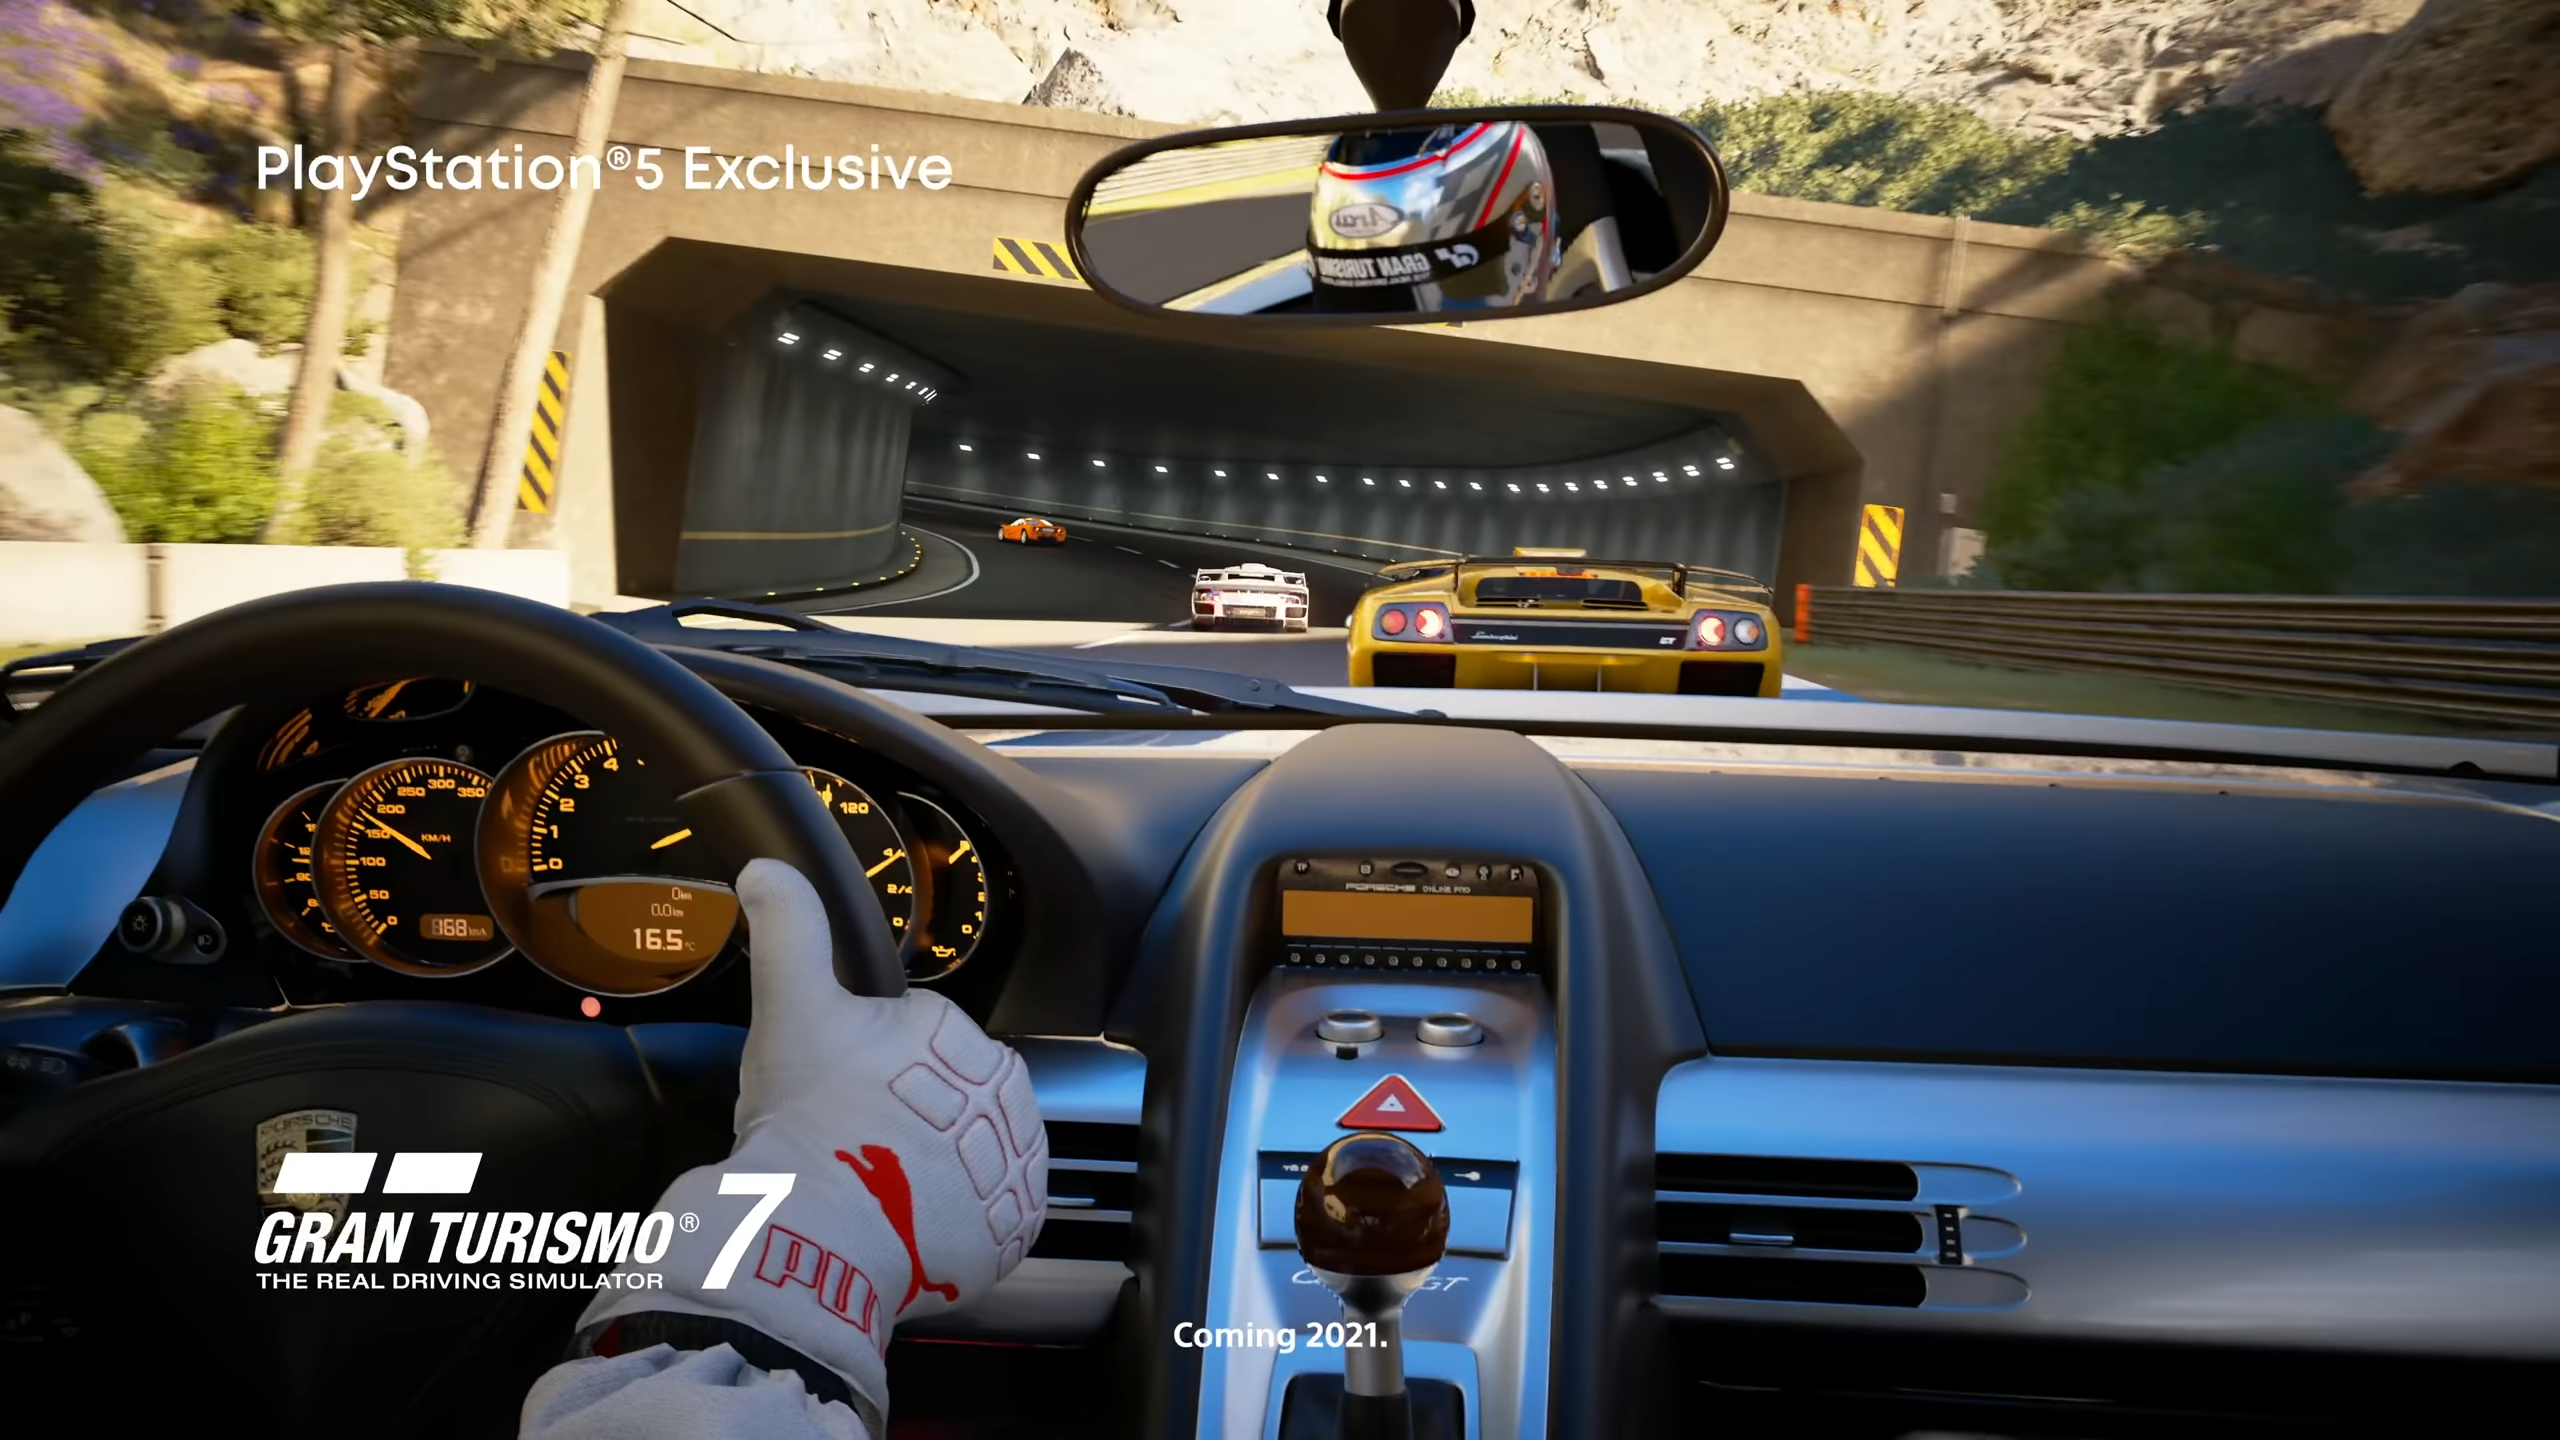 Next God Of War And Gran Turismo 7 Are Now Cross-Gen Titles, gt 7